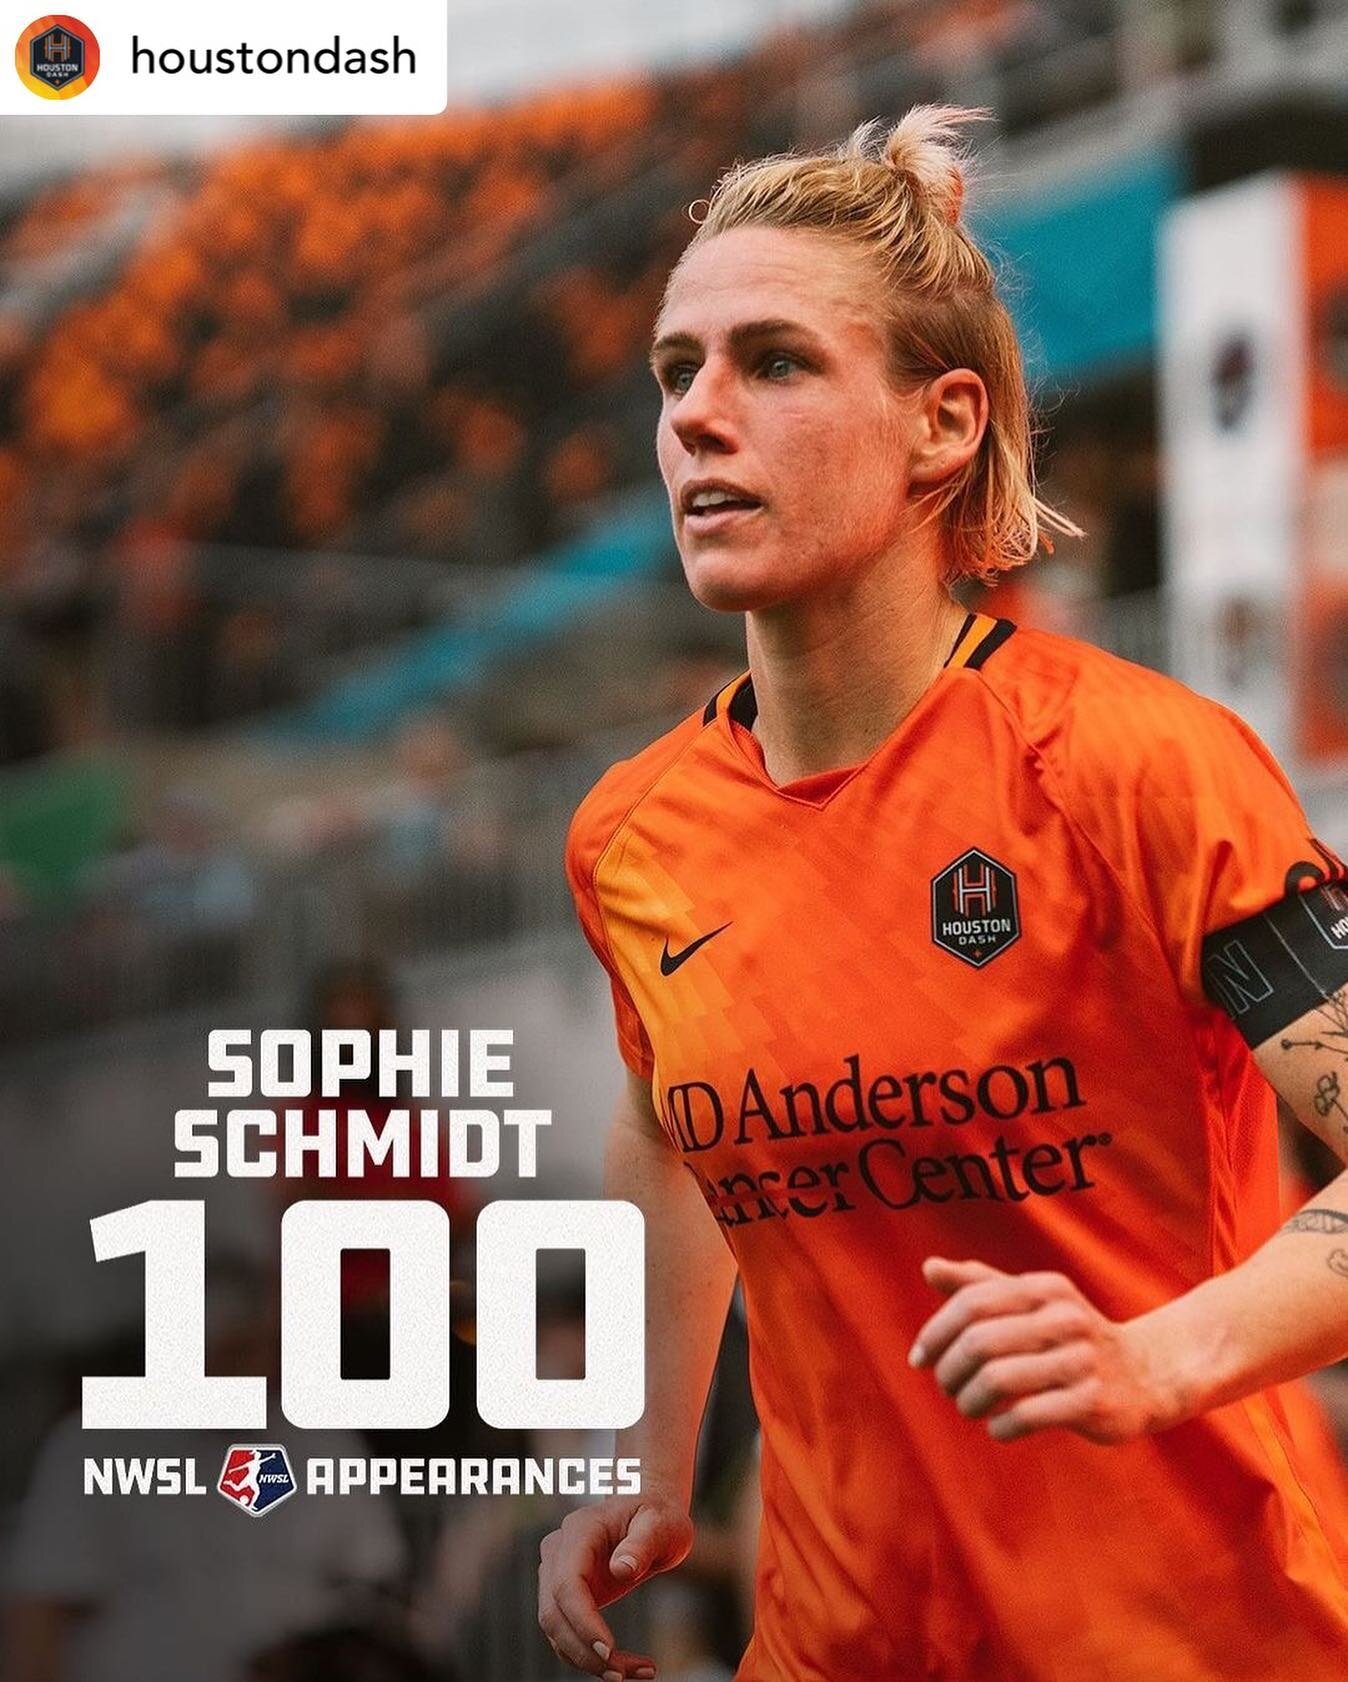 💯 NWSL games for @sophieschmidt13 

👏👏👏

#canwnt #canxnt #wsoccerCa #canadasoccer #nwsl #woso